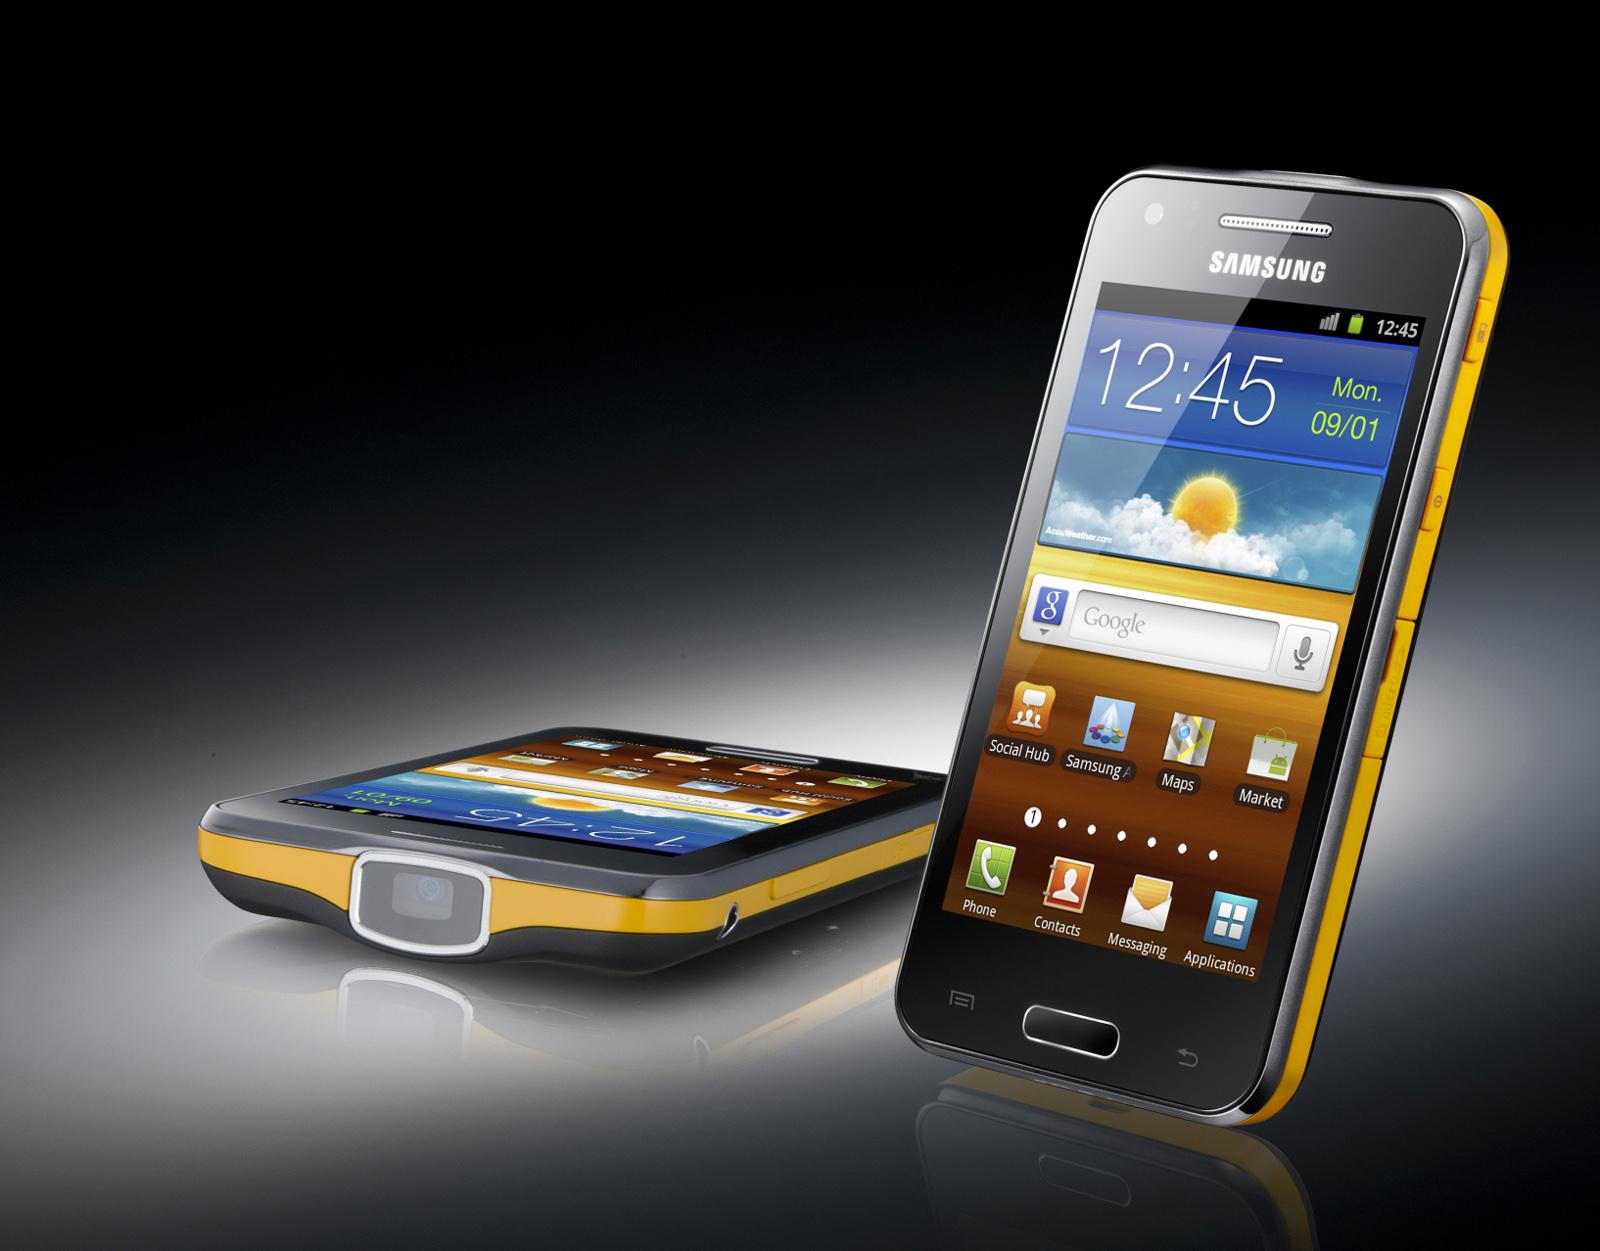 Tizen-powered Linux Phones Coming in 2013